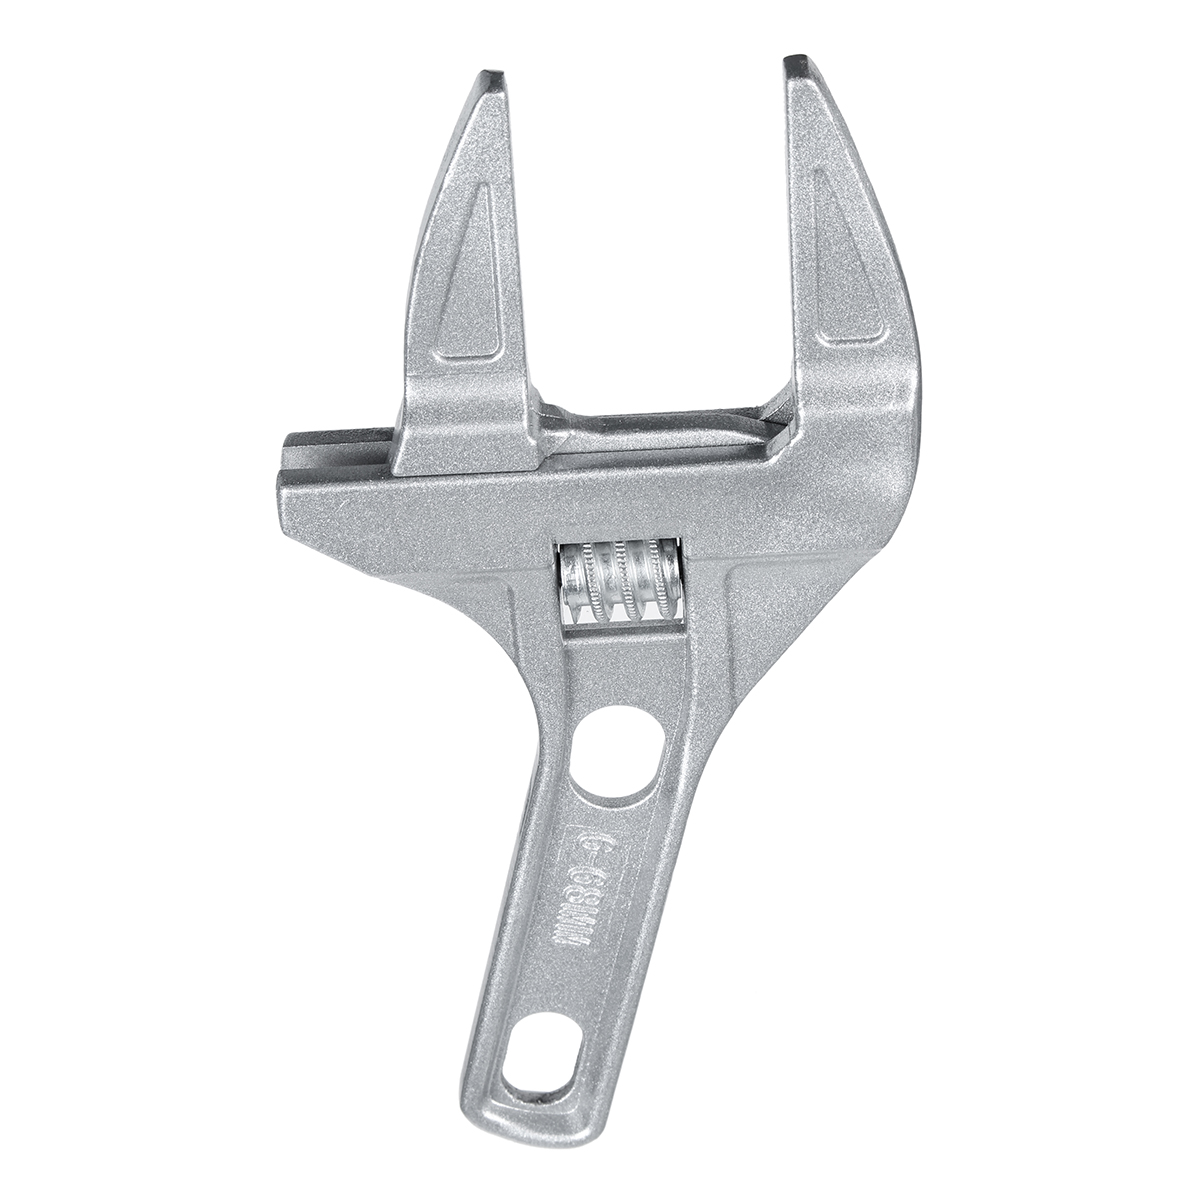 Adjustable-Spanner-16-68mm-Big-Opening-Spanner-Wrench-Mini-Nut-Key-Hand-Tools-Metal-Universal-Spanne-1625089-2